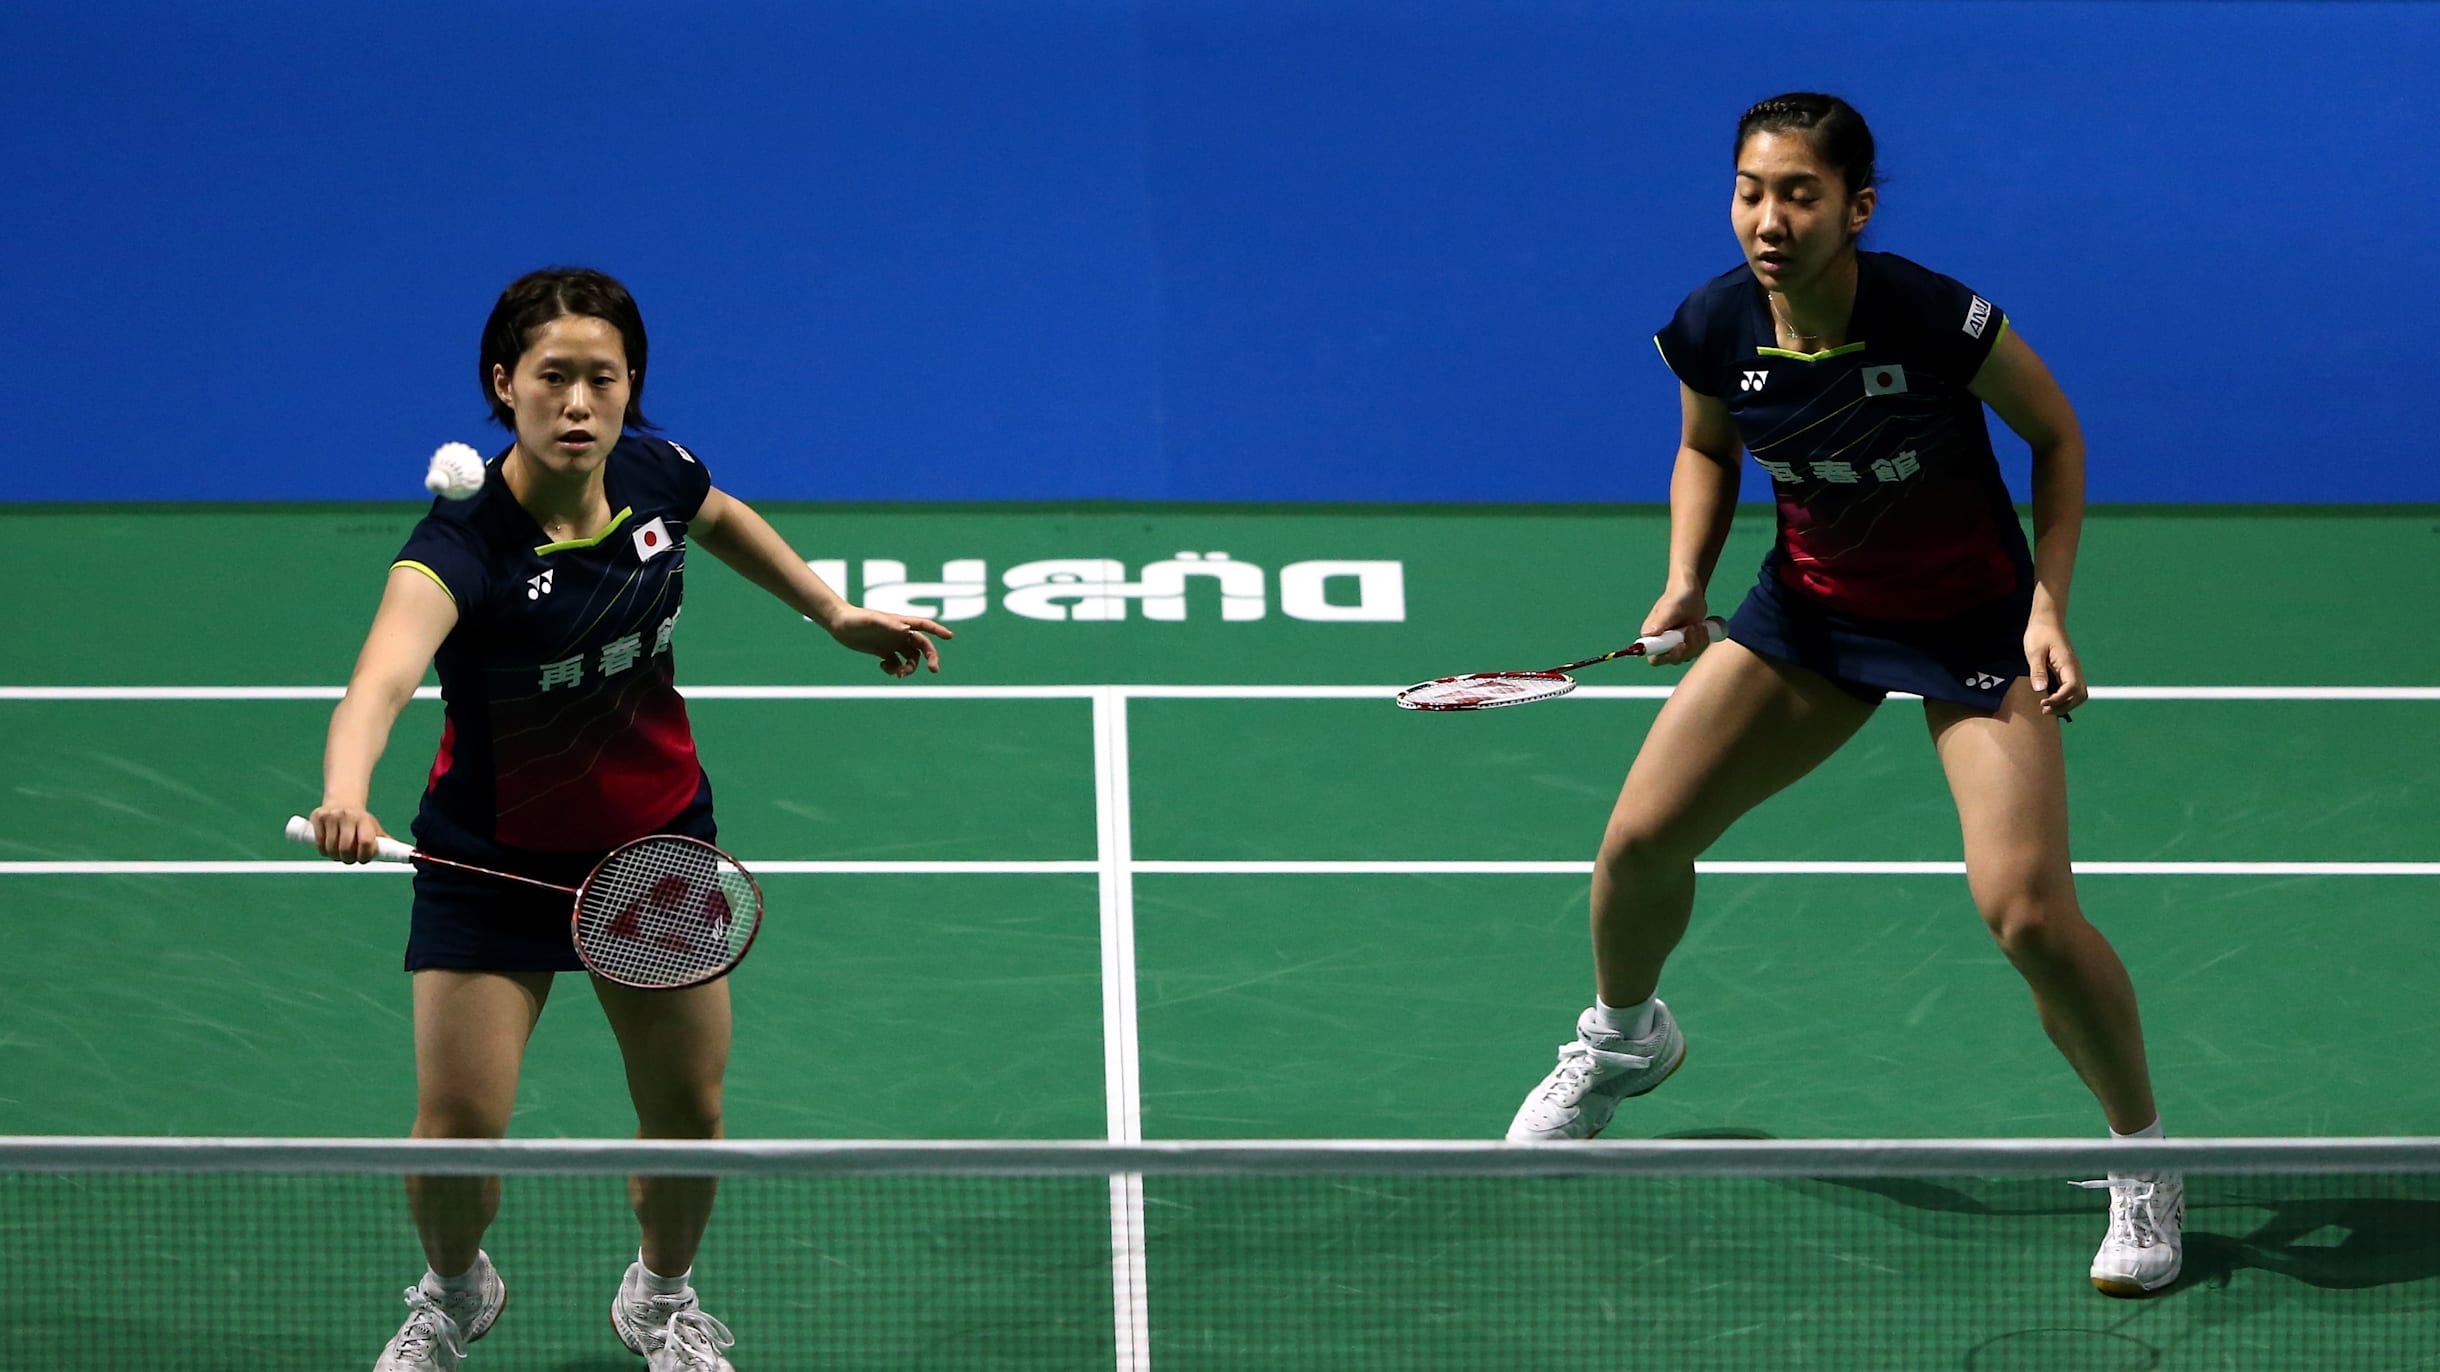 Longest badminton match The Japan vs Indonesia epic at Asian championships